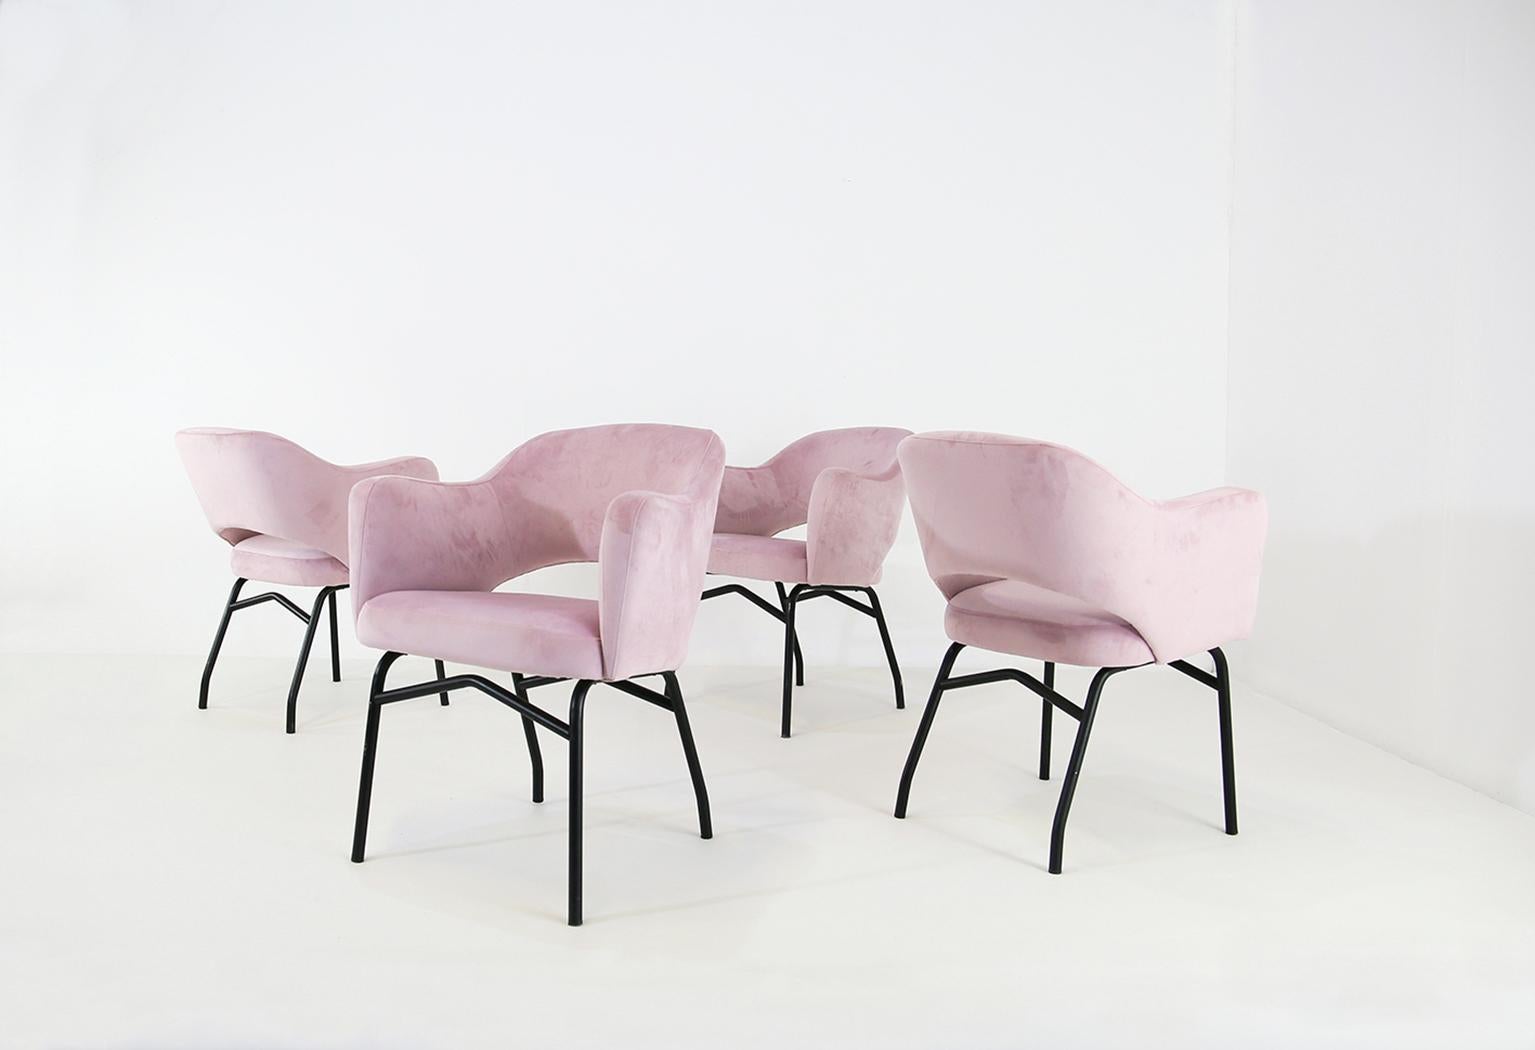 Set of 4 dining chairs made in Italy in the 1950s. The chairs have all been restored in a beautiful pink velvet. Their iron structure has also been restored and painted. The chairs are in the style of Ico Parisi. The set is ideal to complete your